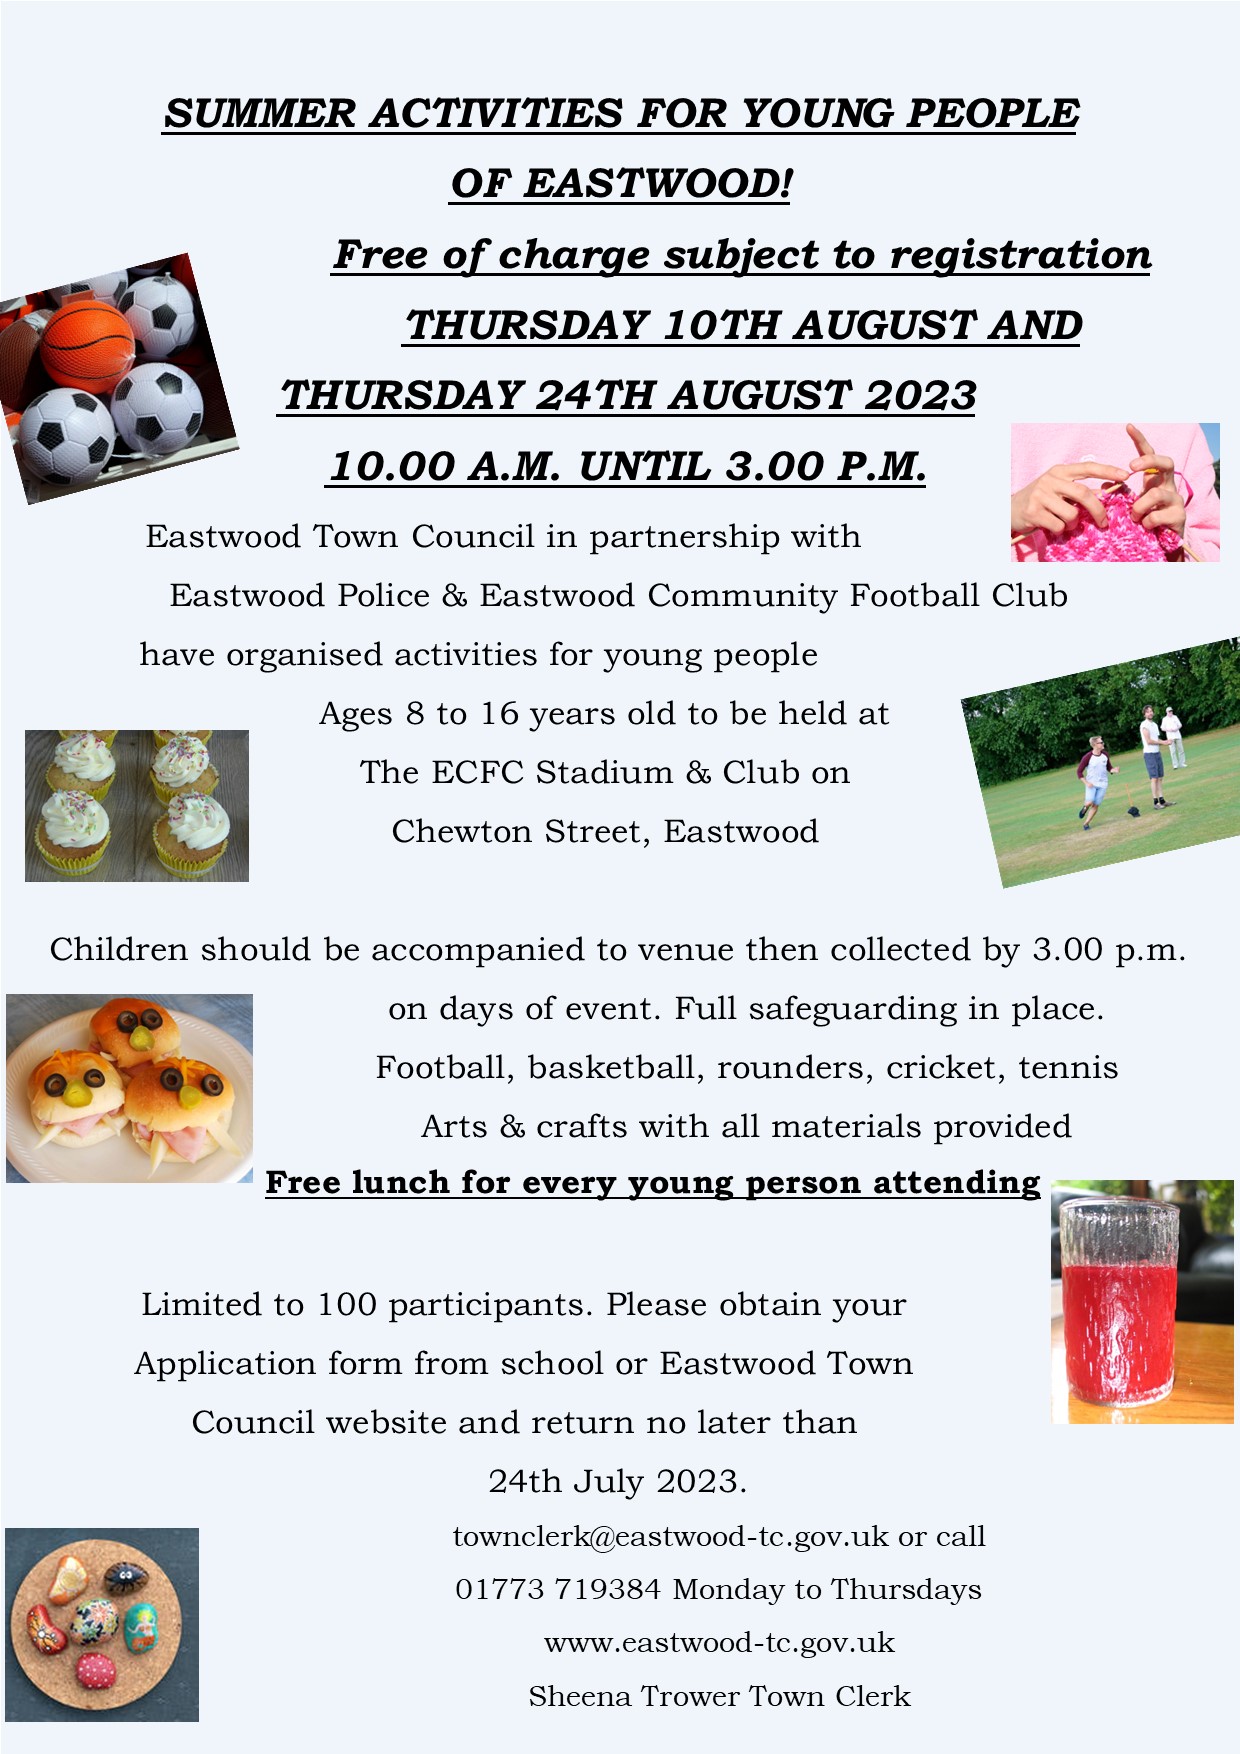 Eastwood activities for young people living in Eastwood, Nottinghamshire  event.